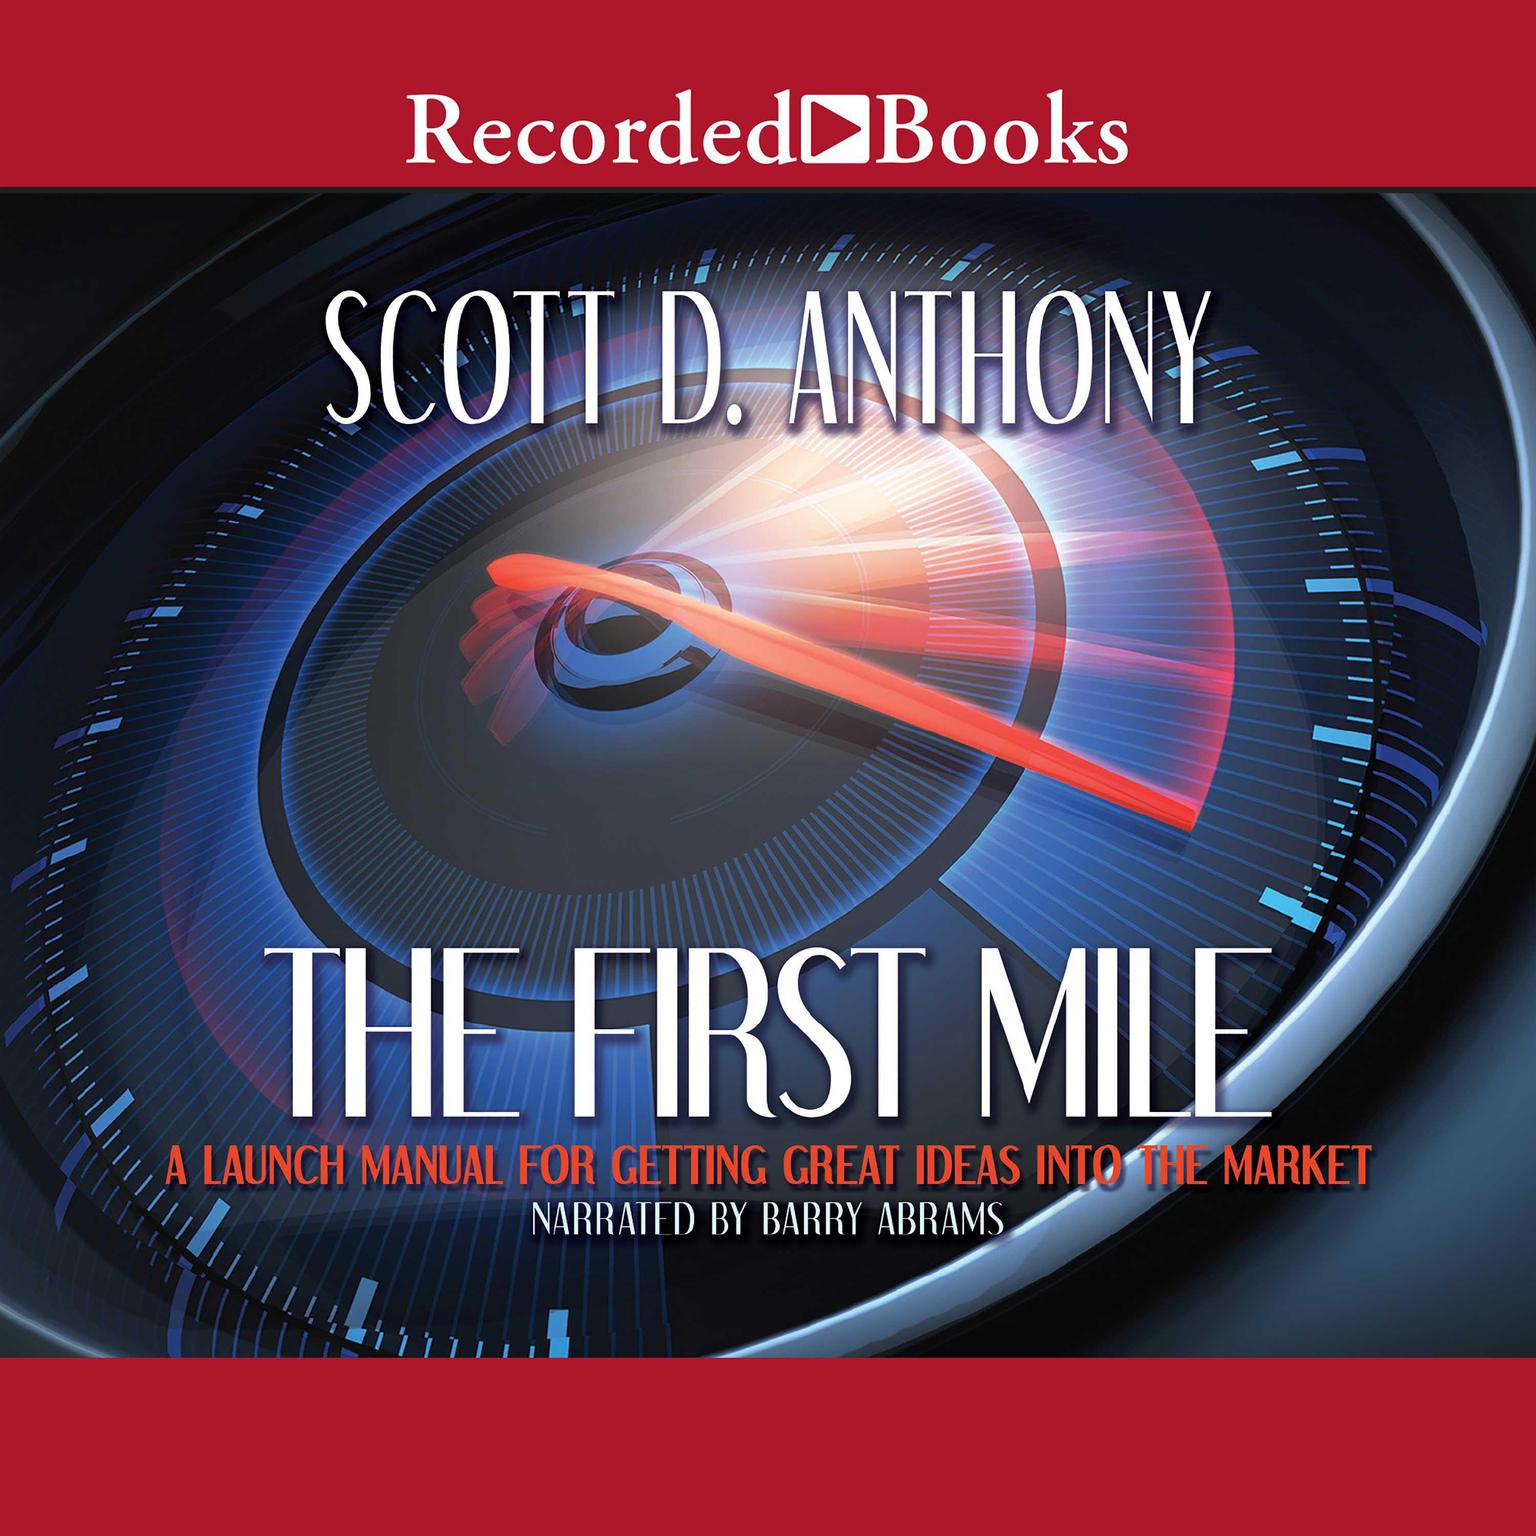 The First Mile: A Launch Manual for Getting Great Ideas Into the Market Audiobook, by Scott D. Anthony